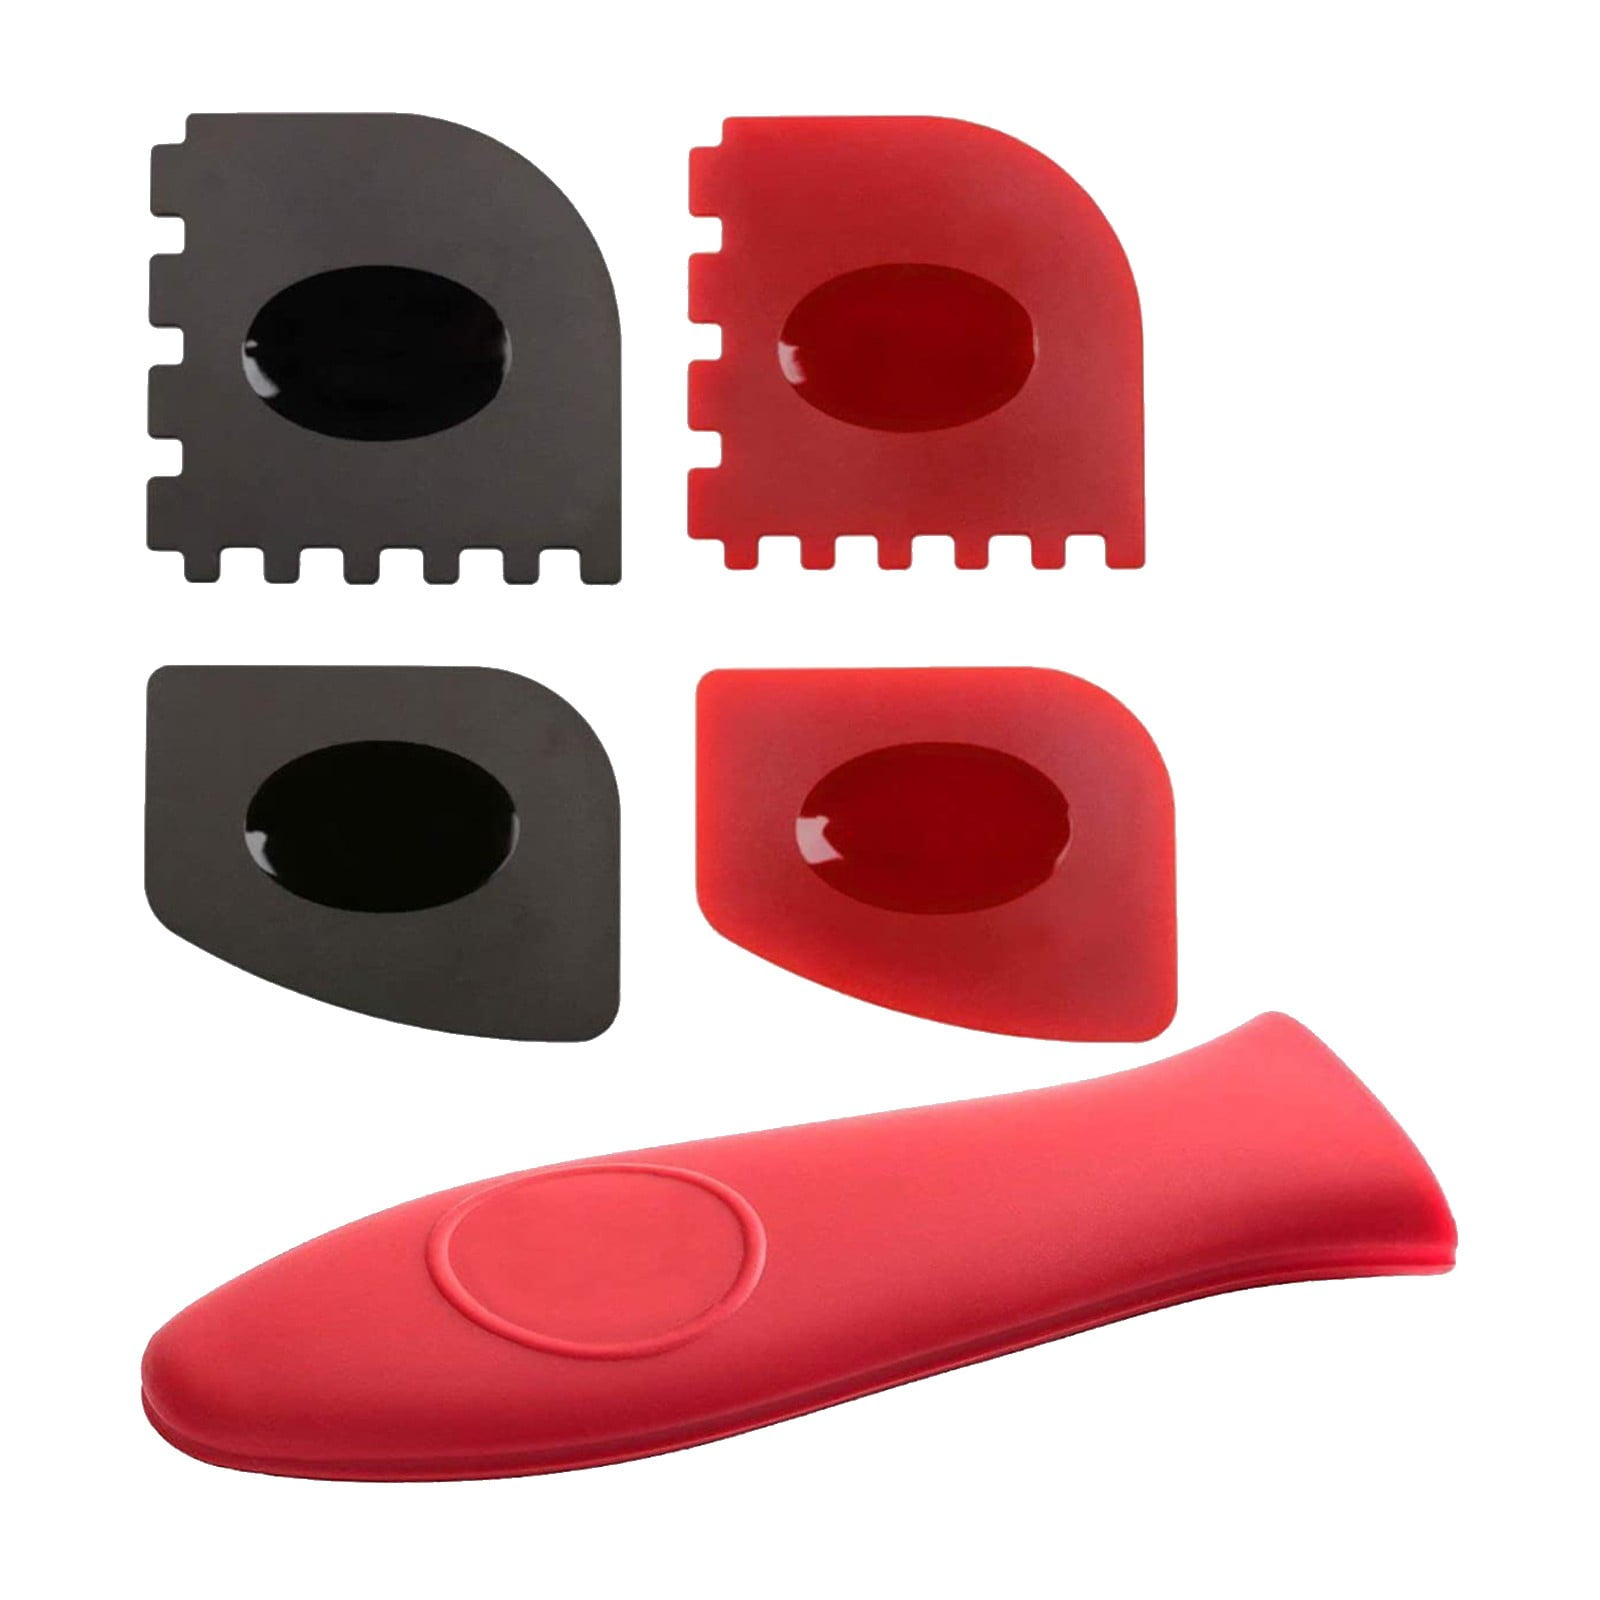 New Durable 6 Pack Grill Pan Scrapers Silicone Hot Handle Holder Red/Black 